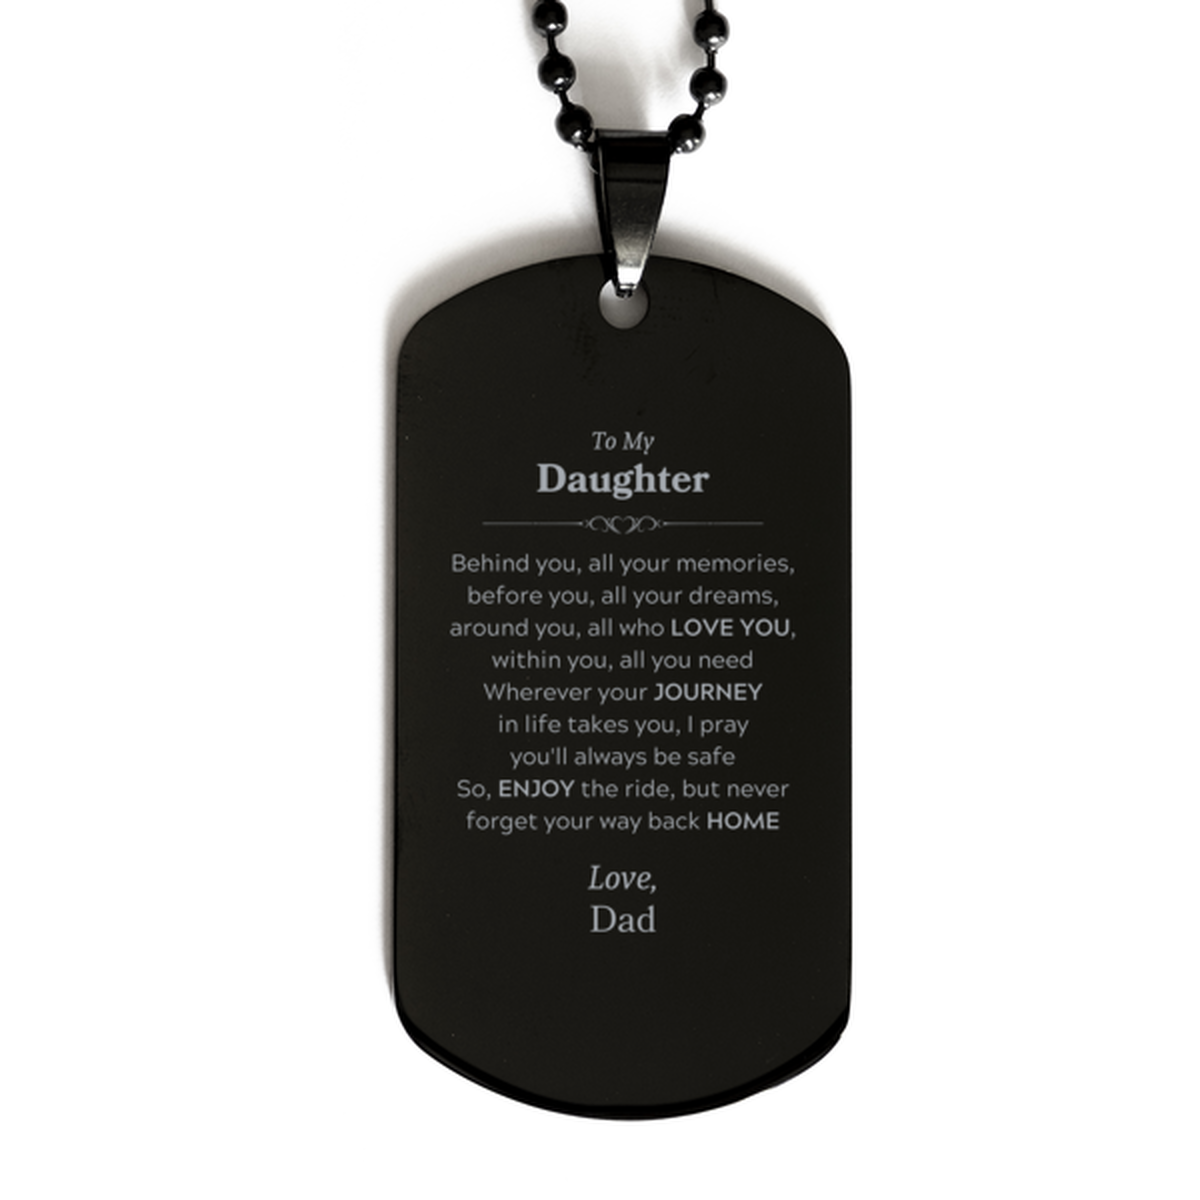 To My Daughter Graduation Gifts from Dad, Daughter Black Dog Tag Christmas Birthday Gifts for Daughter Behind you, all your memories, before you, all your dreams. Love, Dad